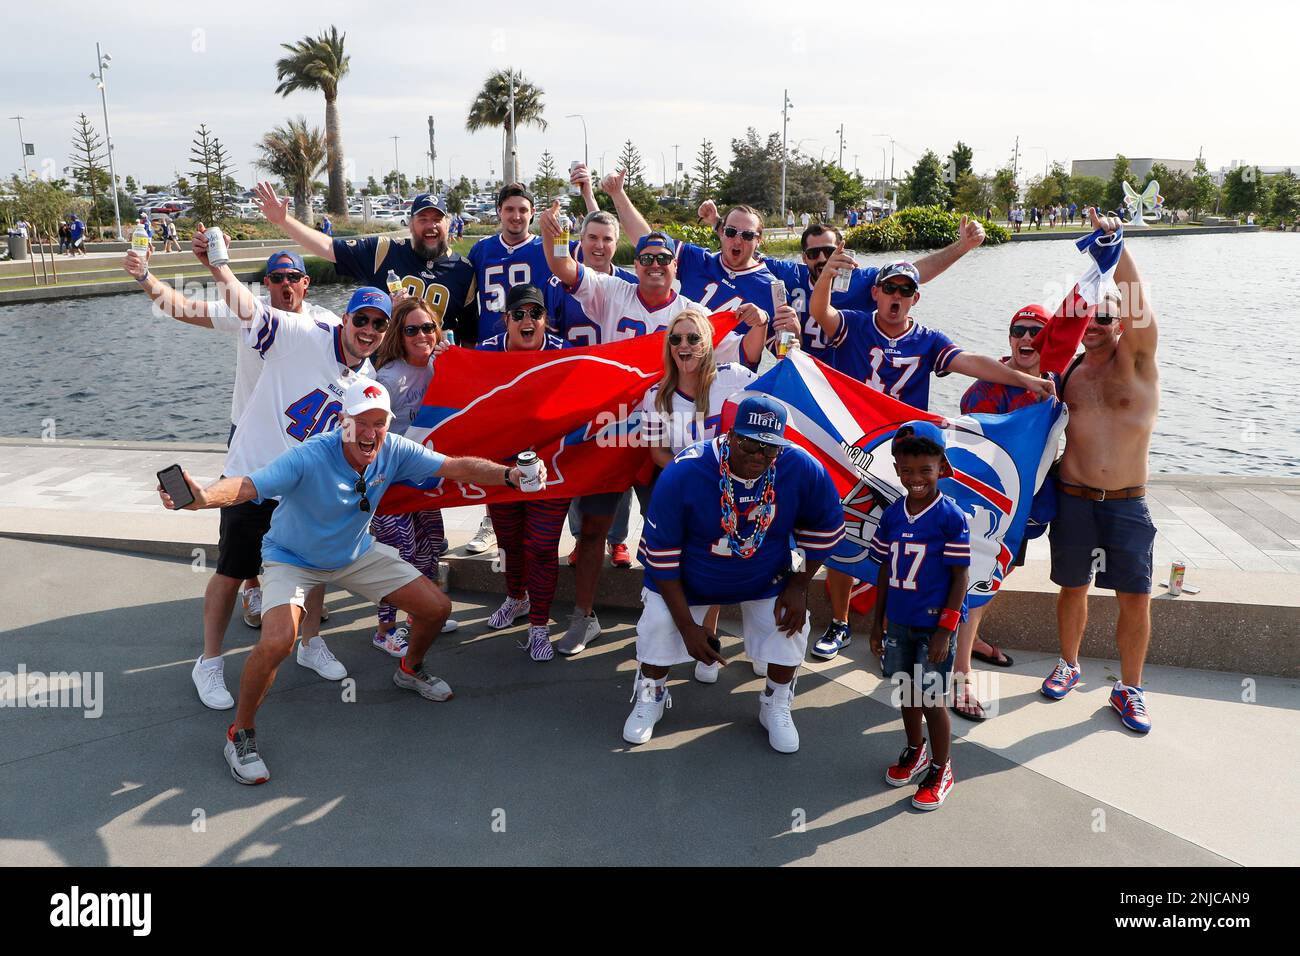 INGLEWOOD, CA - SEPTEMBER 08: Bills fans gather in front of the entry gates  prior to the NFL Opening Kickoff game between the Buffalo Bills and the Los  Angeles Rams on September